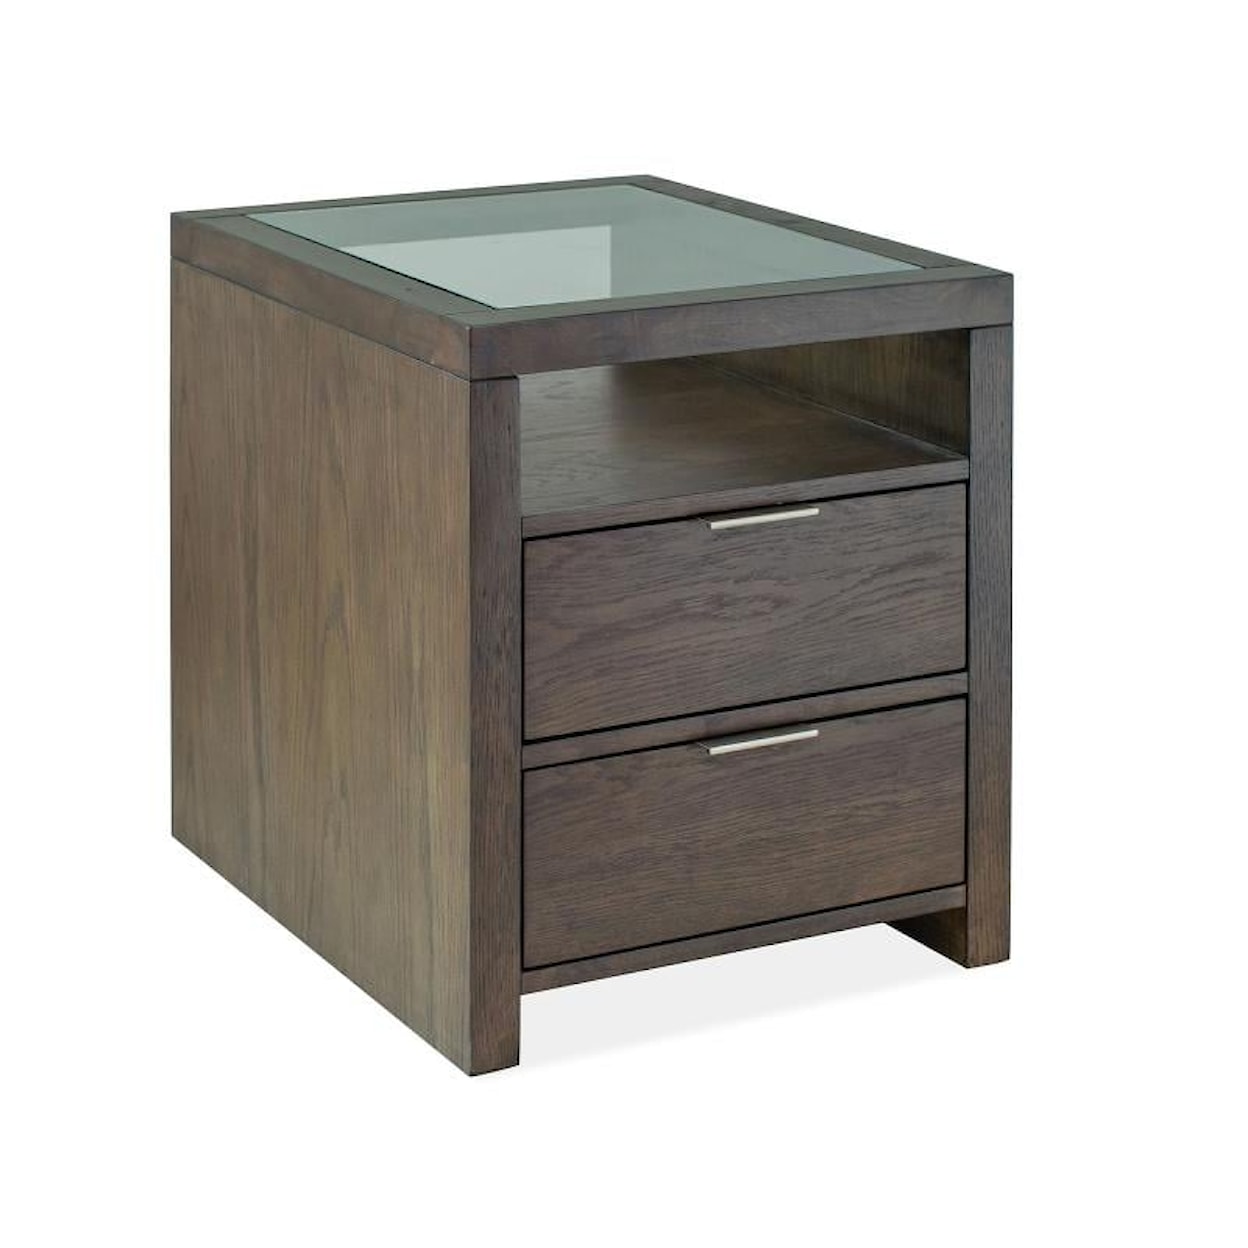 Magnussen Home Merrick Occasional Tables 2-Drawer Rectangular End Table